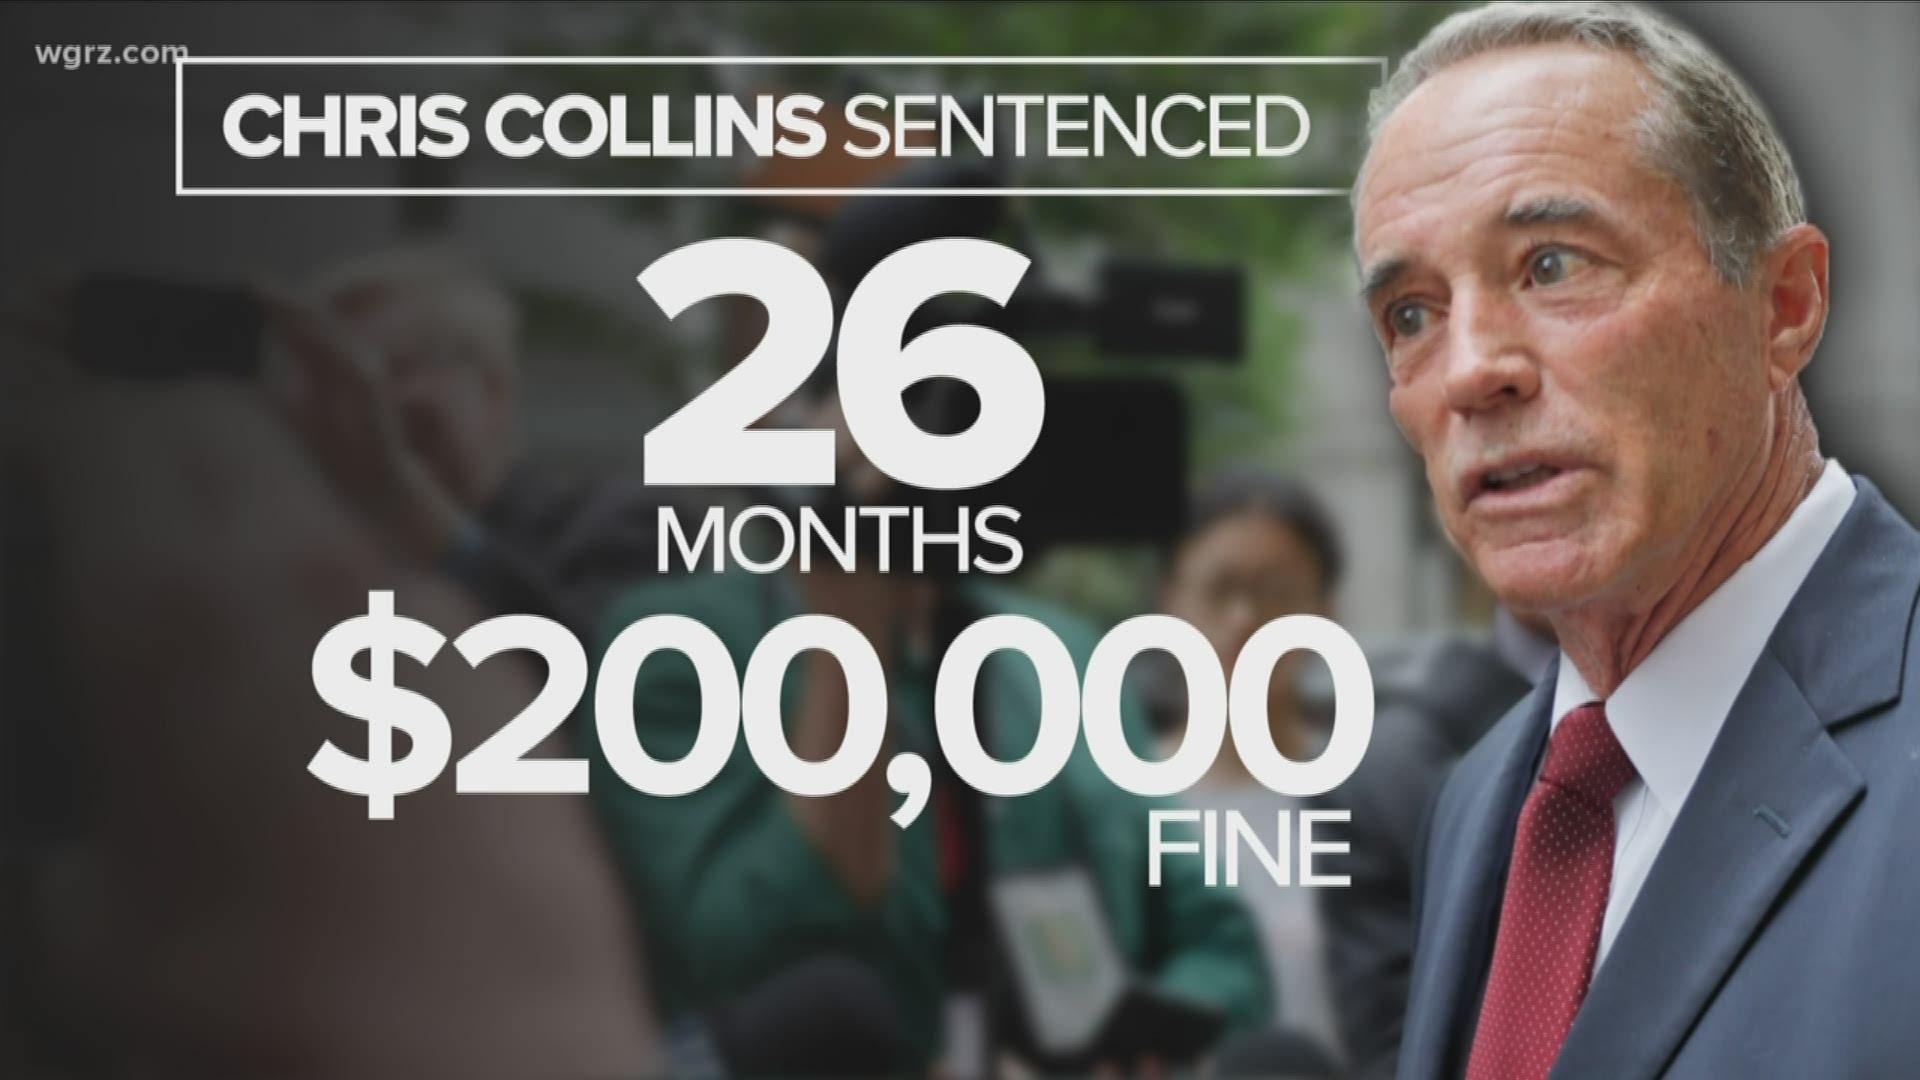 A judge sentenced him to 26 months behind bars, in addition to a 200 thousand dollar fine. Collins has until march 17th to turn himself in.